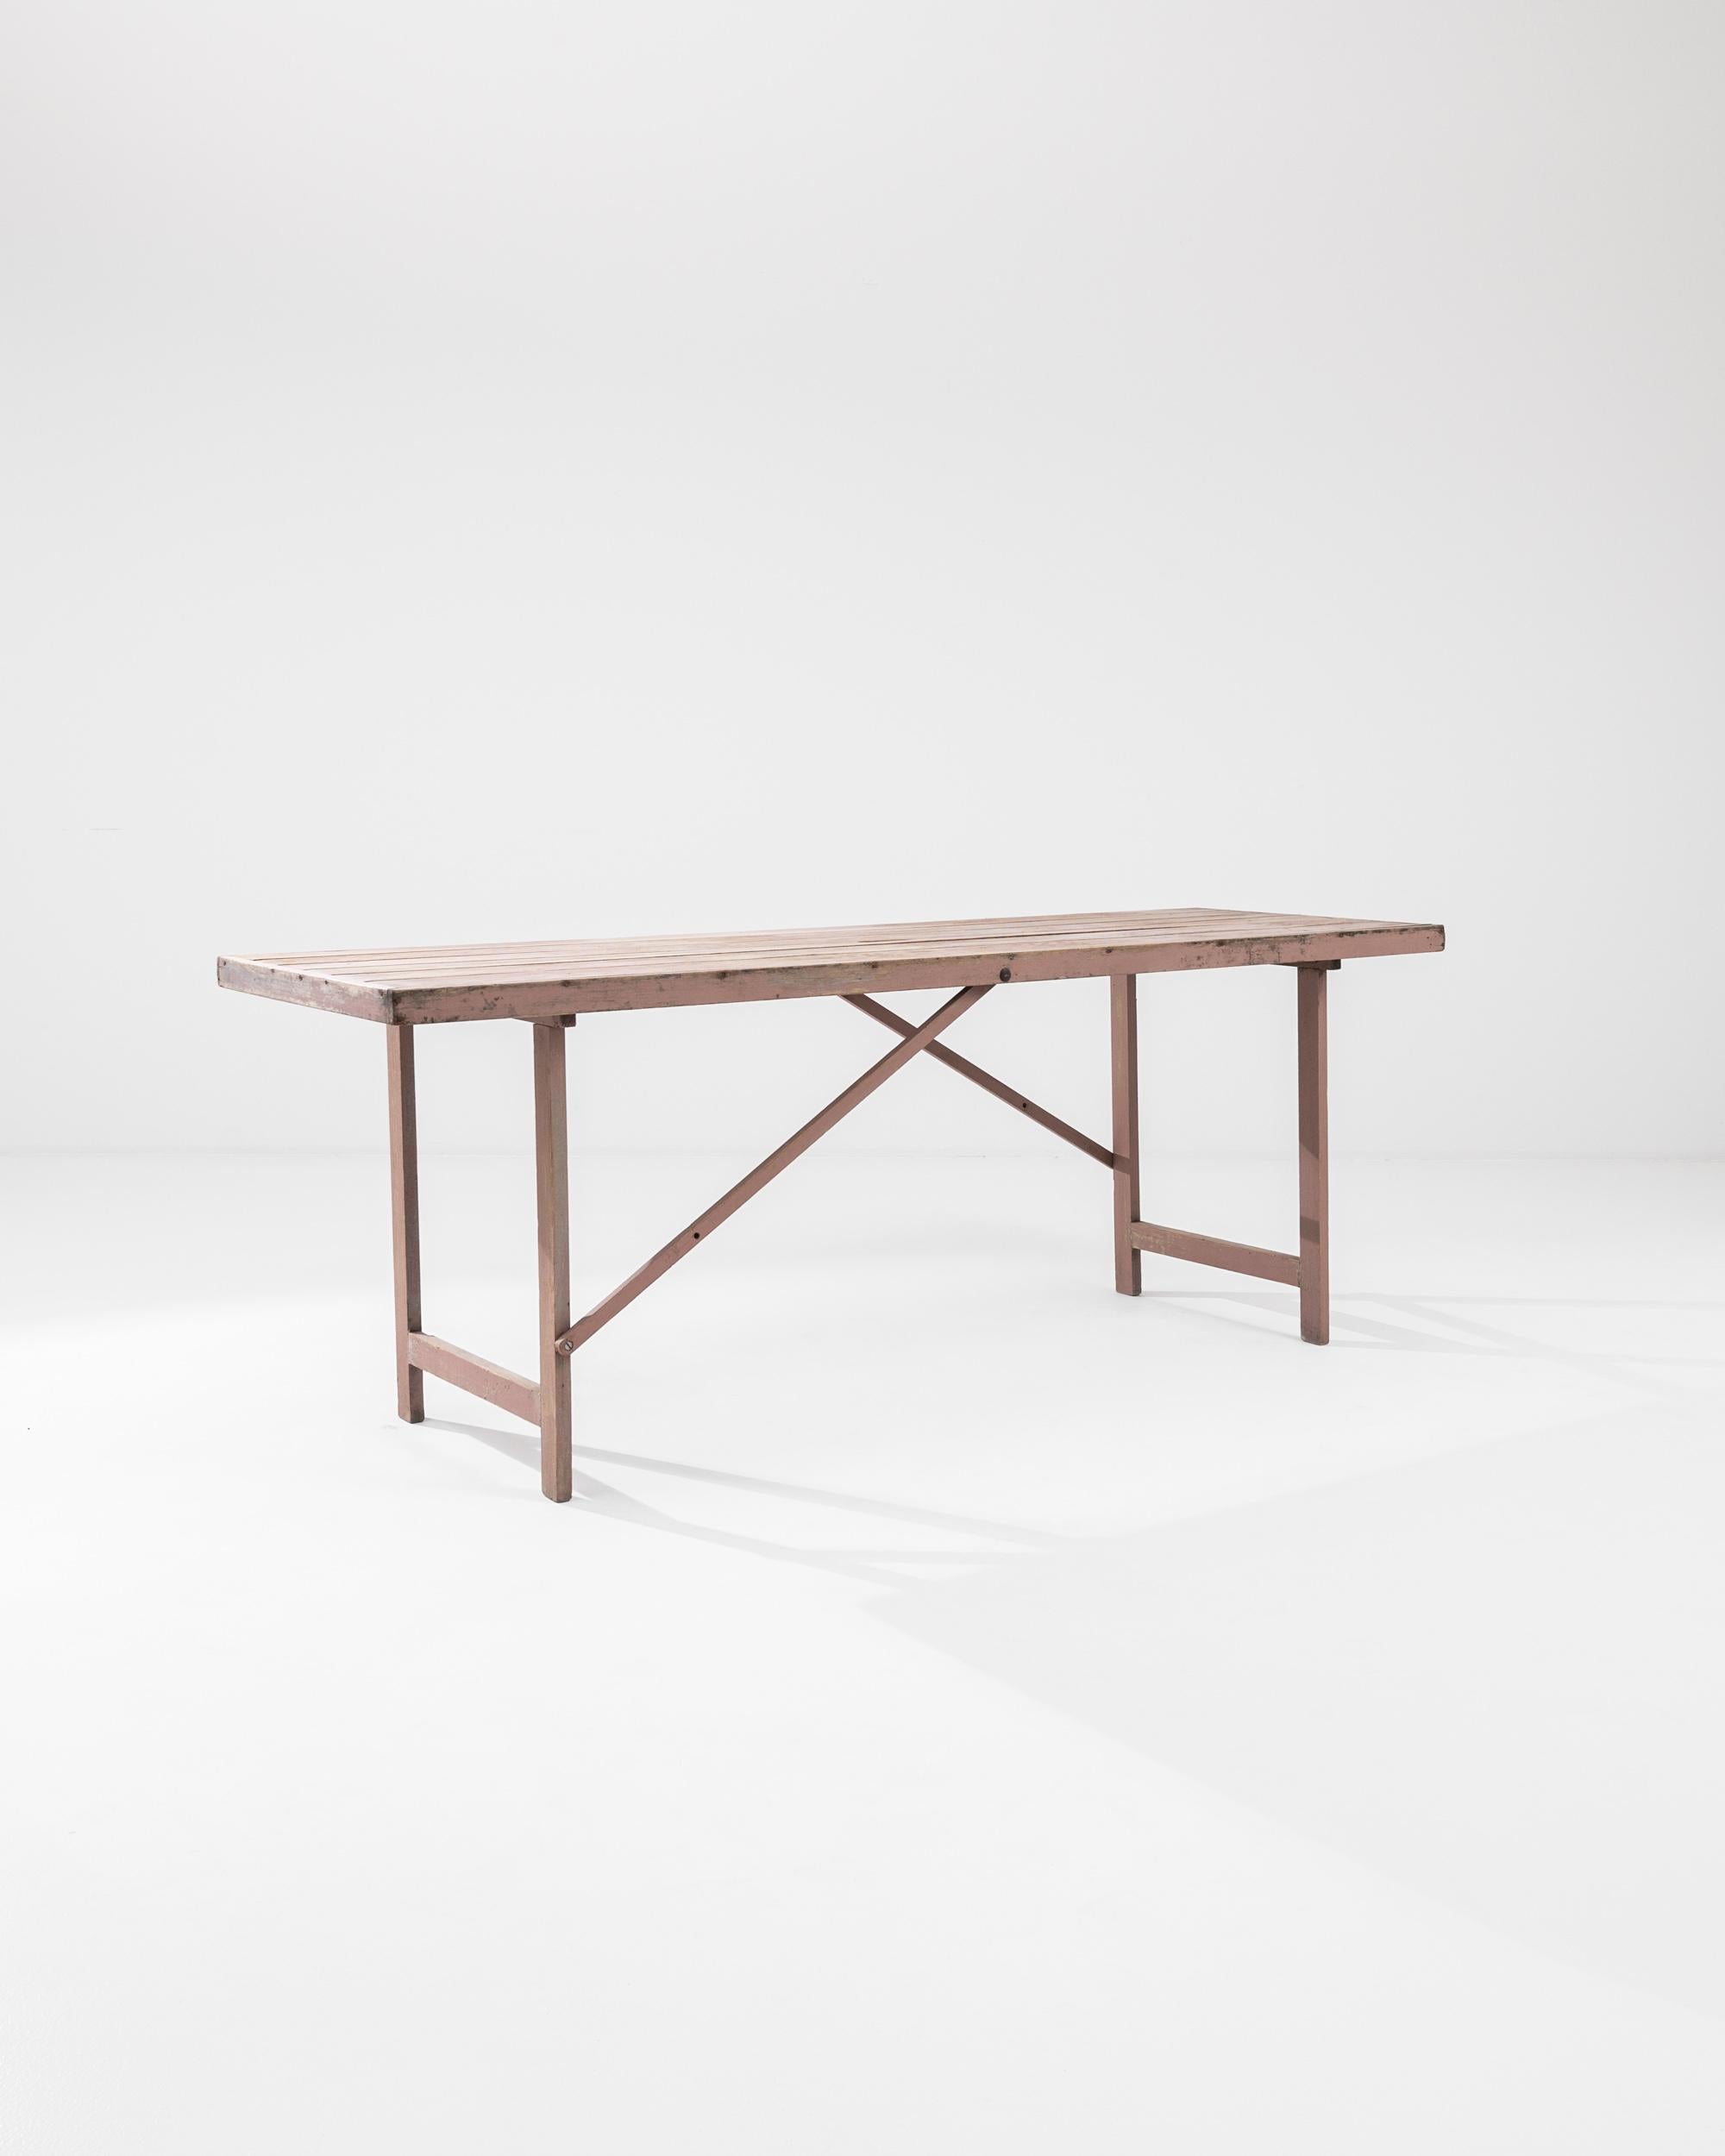 A wooden table made in 20th century, Belgium. The simple yet intriguing structure of this table features two countervailing diagonal supports which provide a pleasing geometric accent to its design. The rose colored pastel paint that coats its